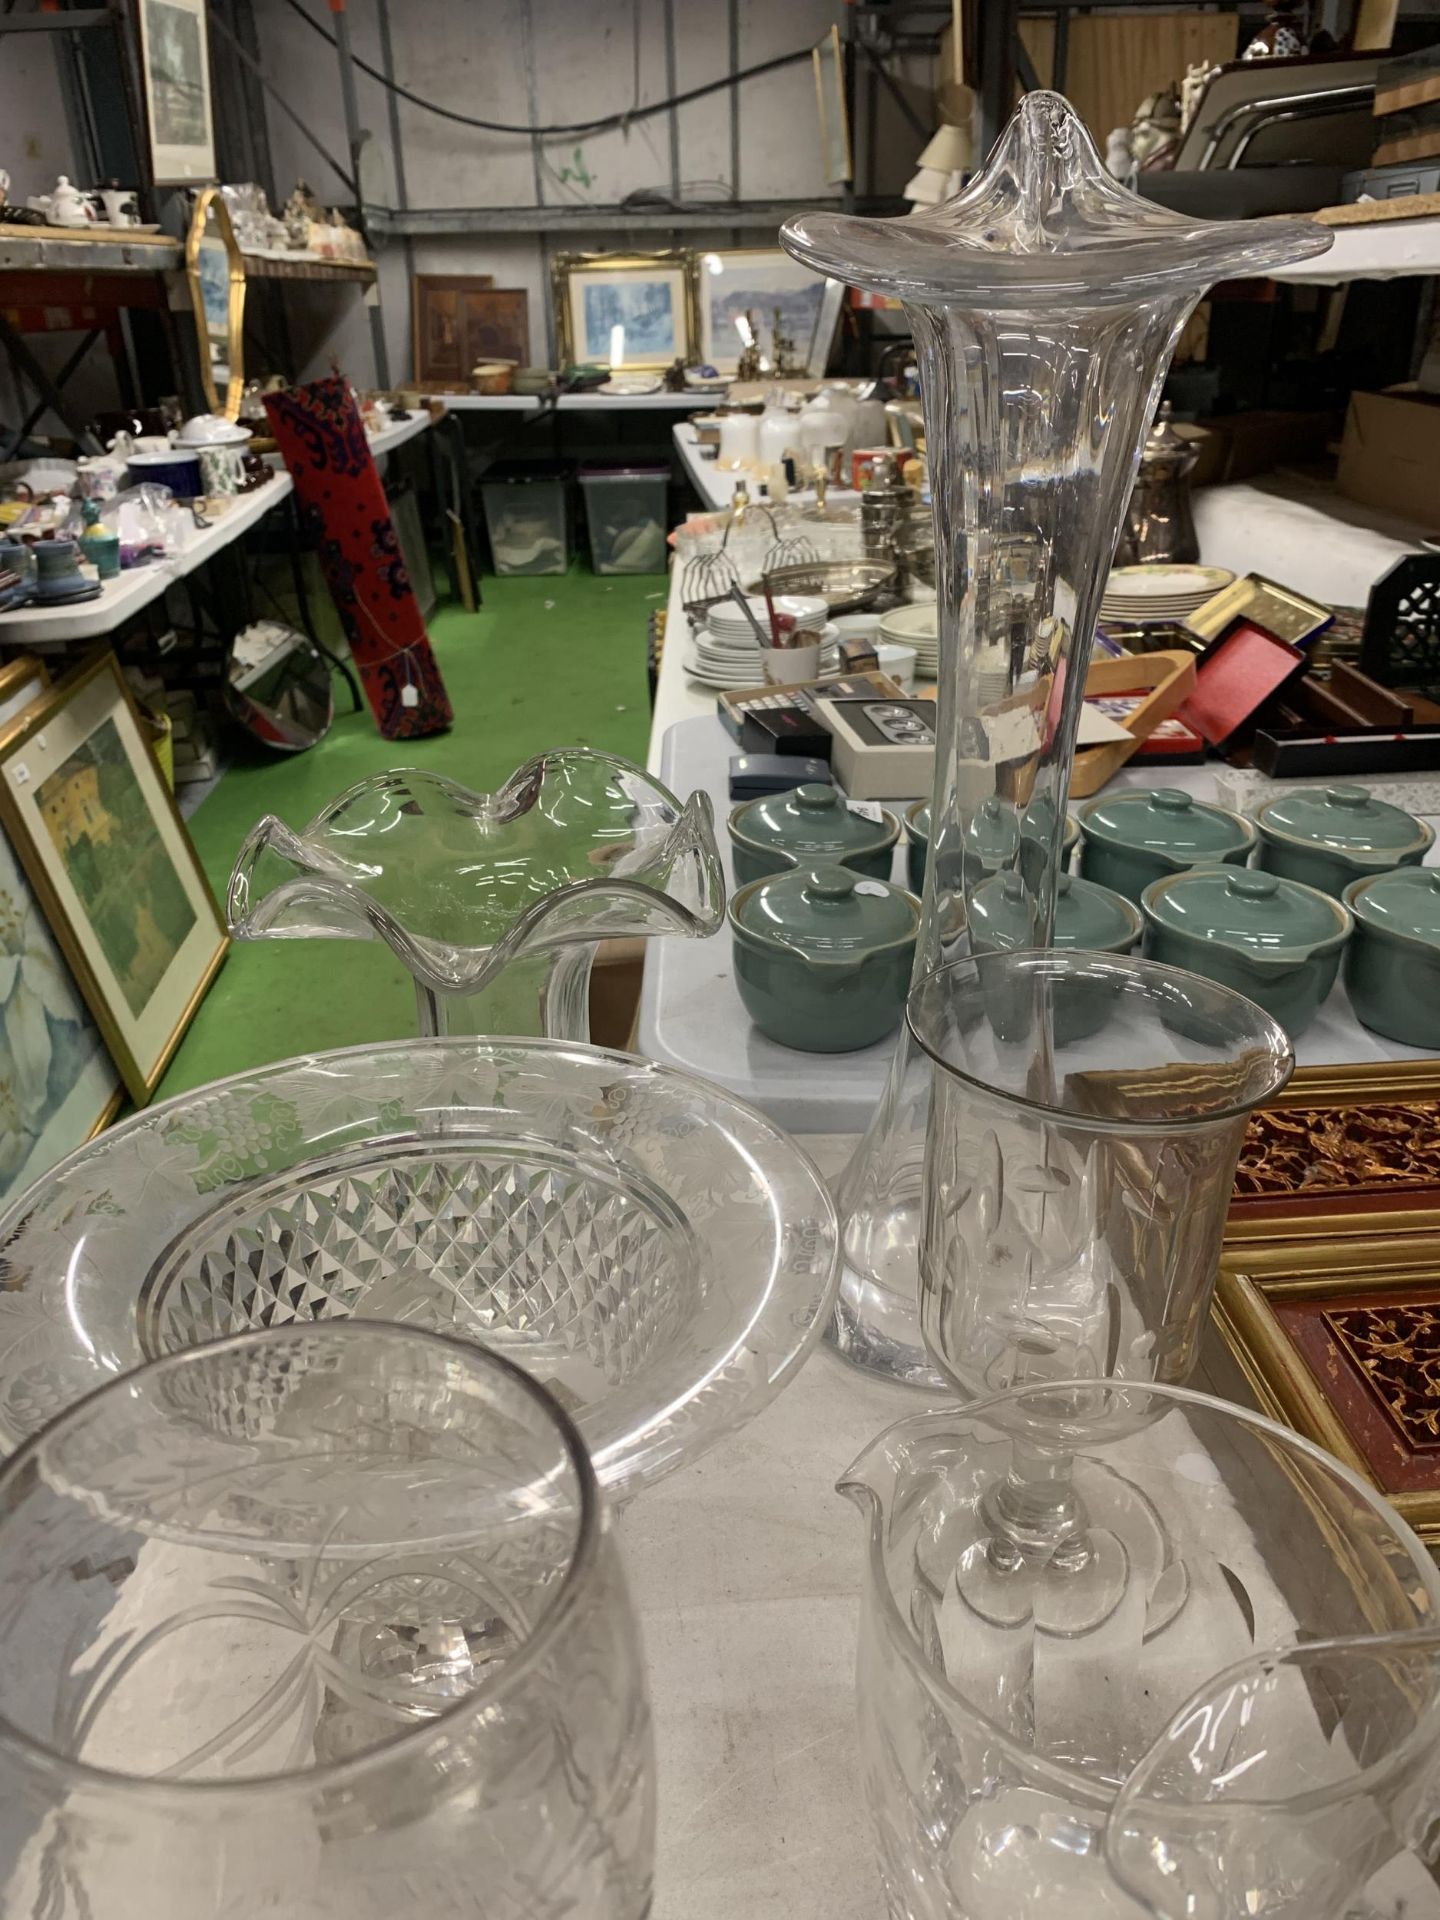 A LARGE QUANTITY OF GLASSWARE TO INCLUDE VASES, A FOOTED BOWL, JUGS, ETC - Image 2 of 3